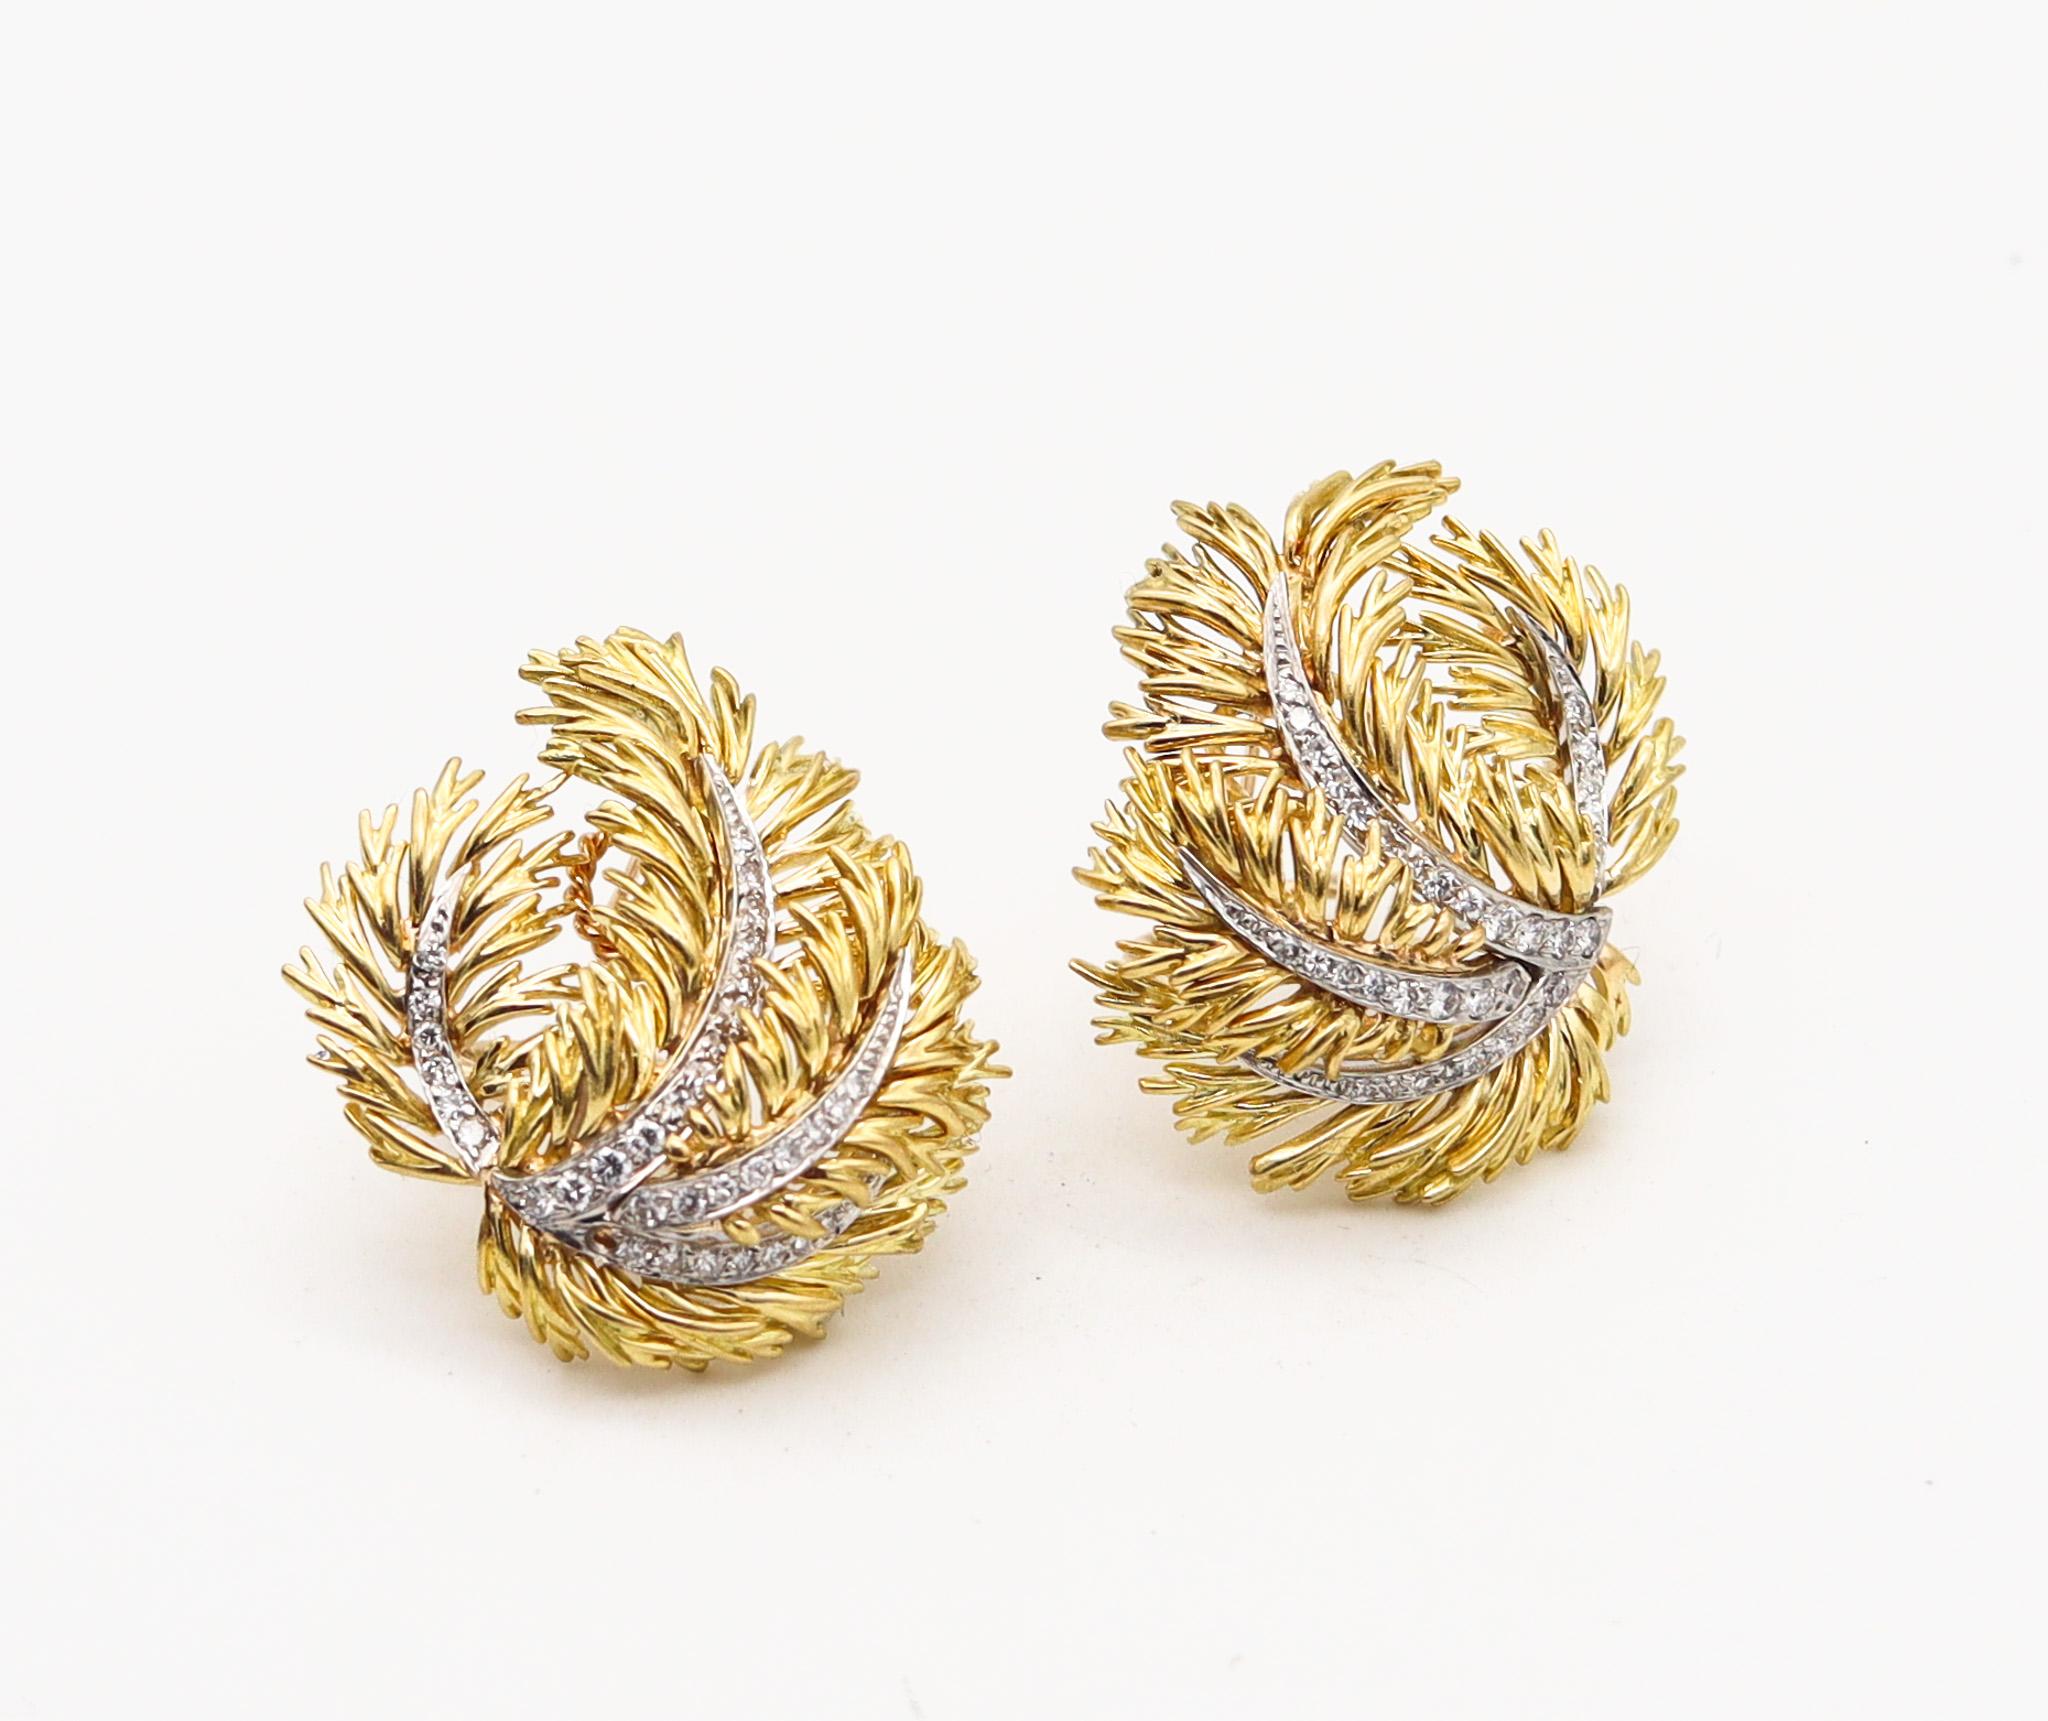 Round Cut Cartier 1960 Clips Earrings In 18Kt Yellow Gold With 1.76 Ctw In VS Diamonds